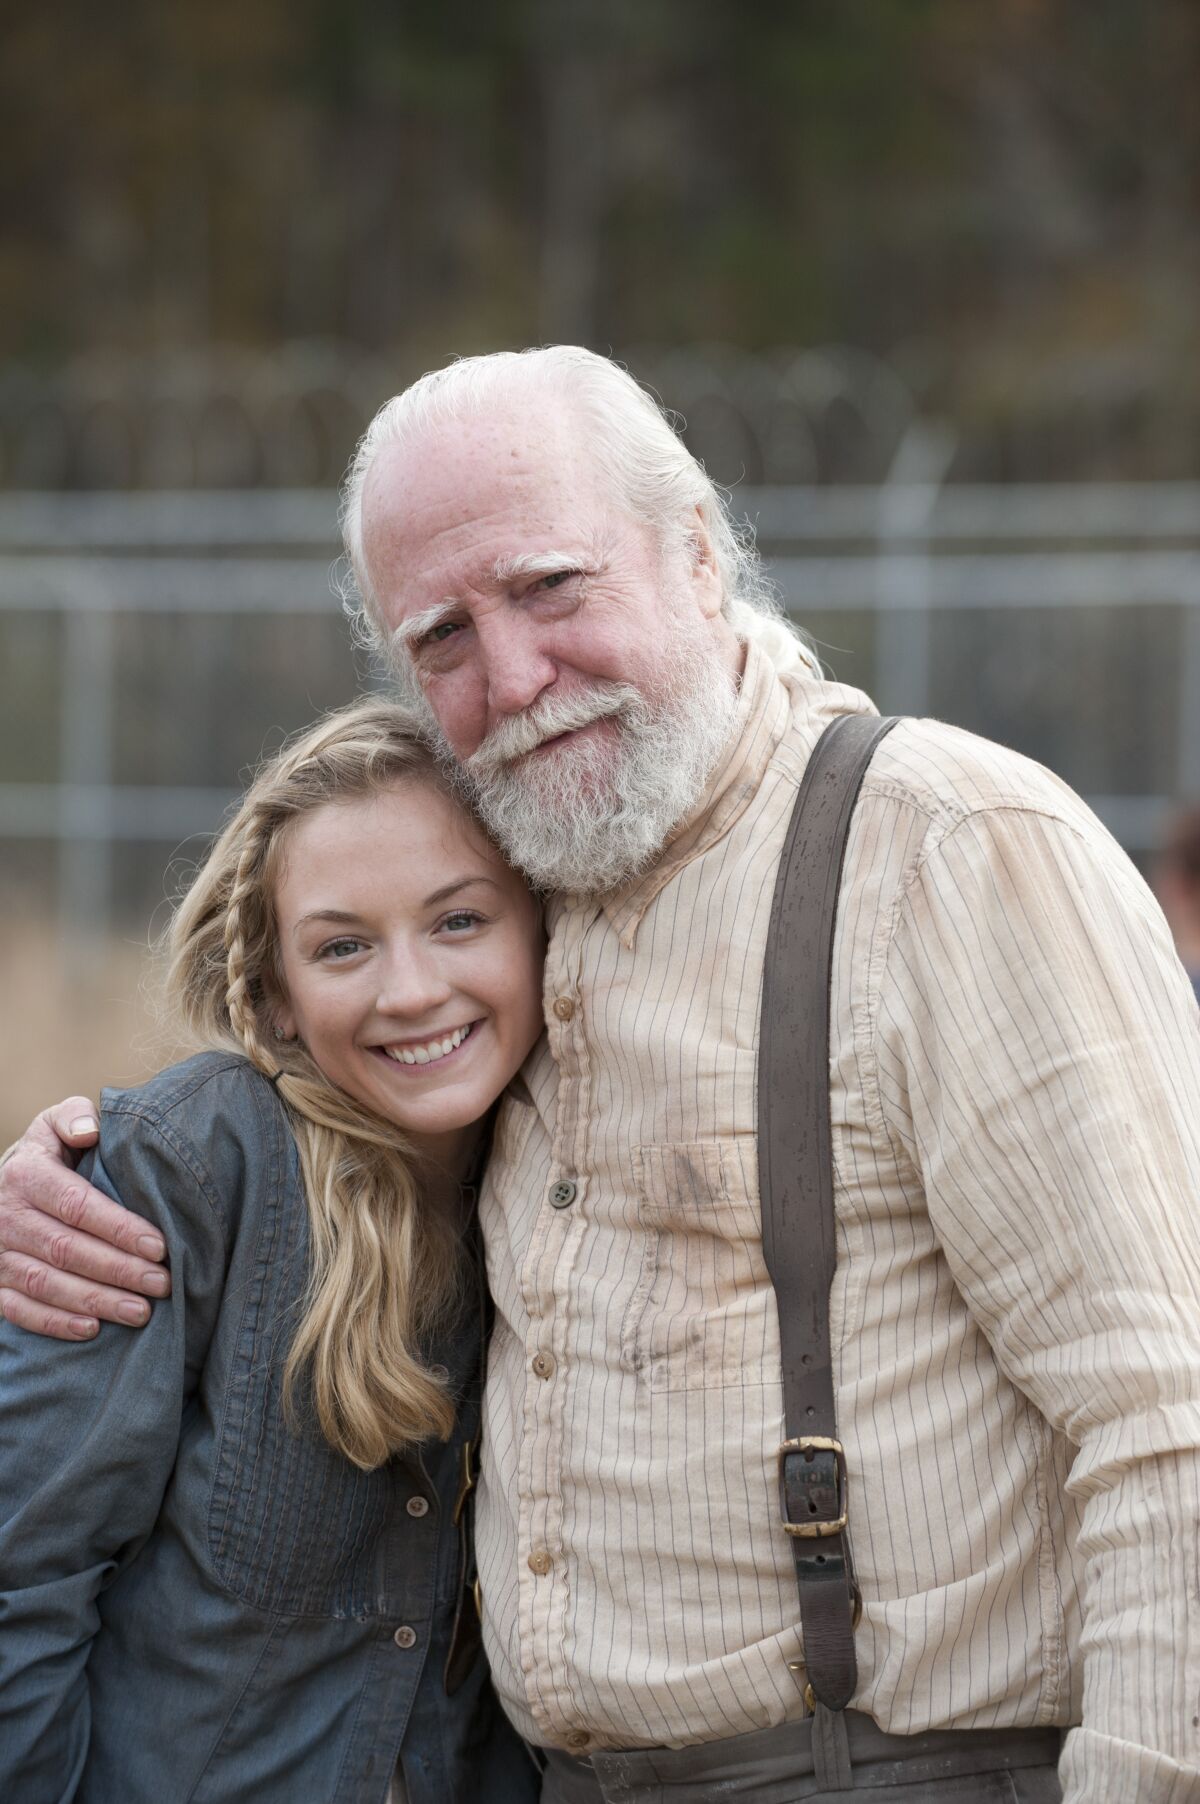 Emily Kinney, who played Beth, and the late Scott Wilson, who played Hershel, behind the scenes of "The Walking Dead."